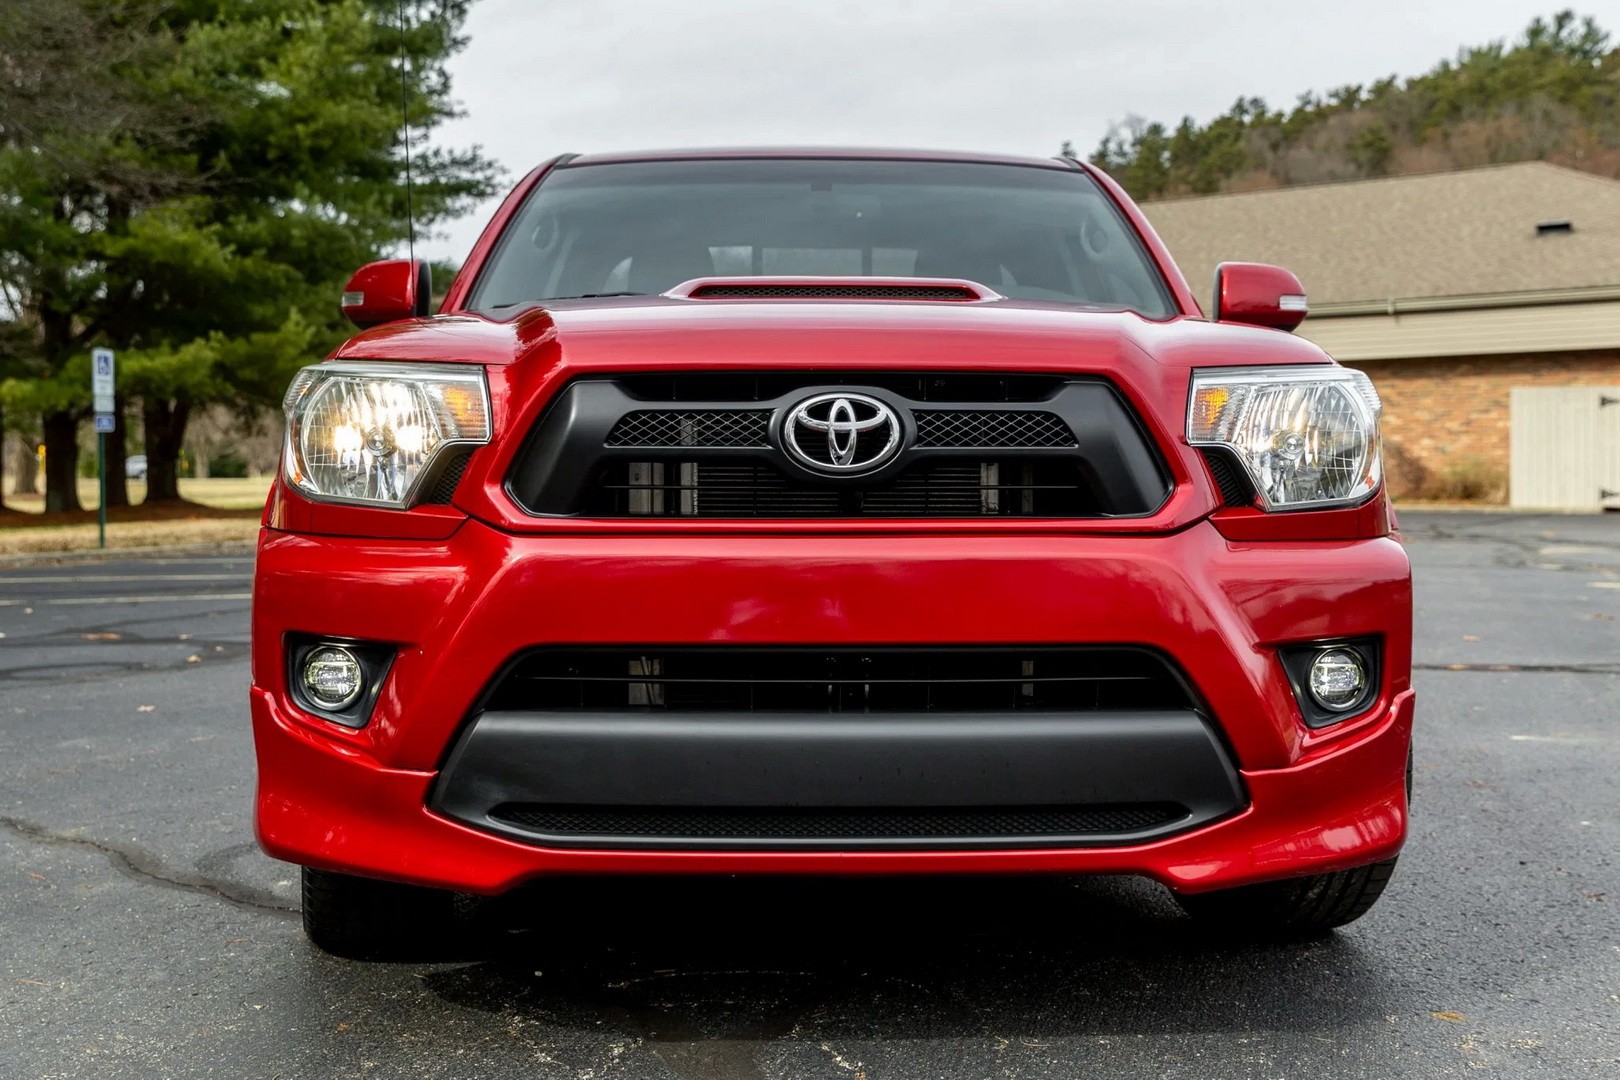 Supercharged 12 Toyota Tacoma X Runner Is A Blue Collar Driver S Truck Autoevolution